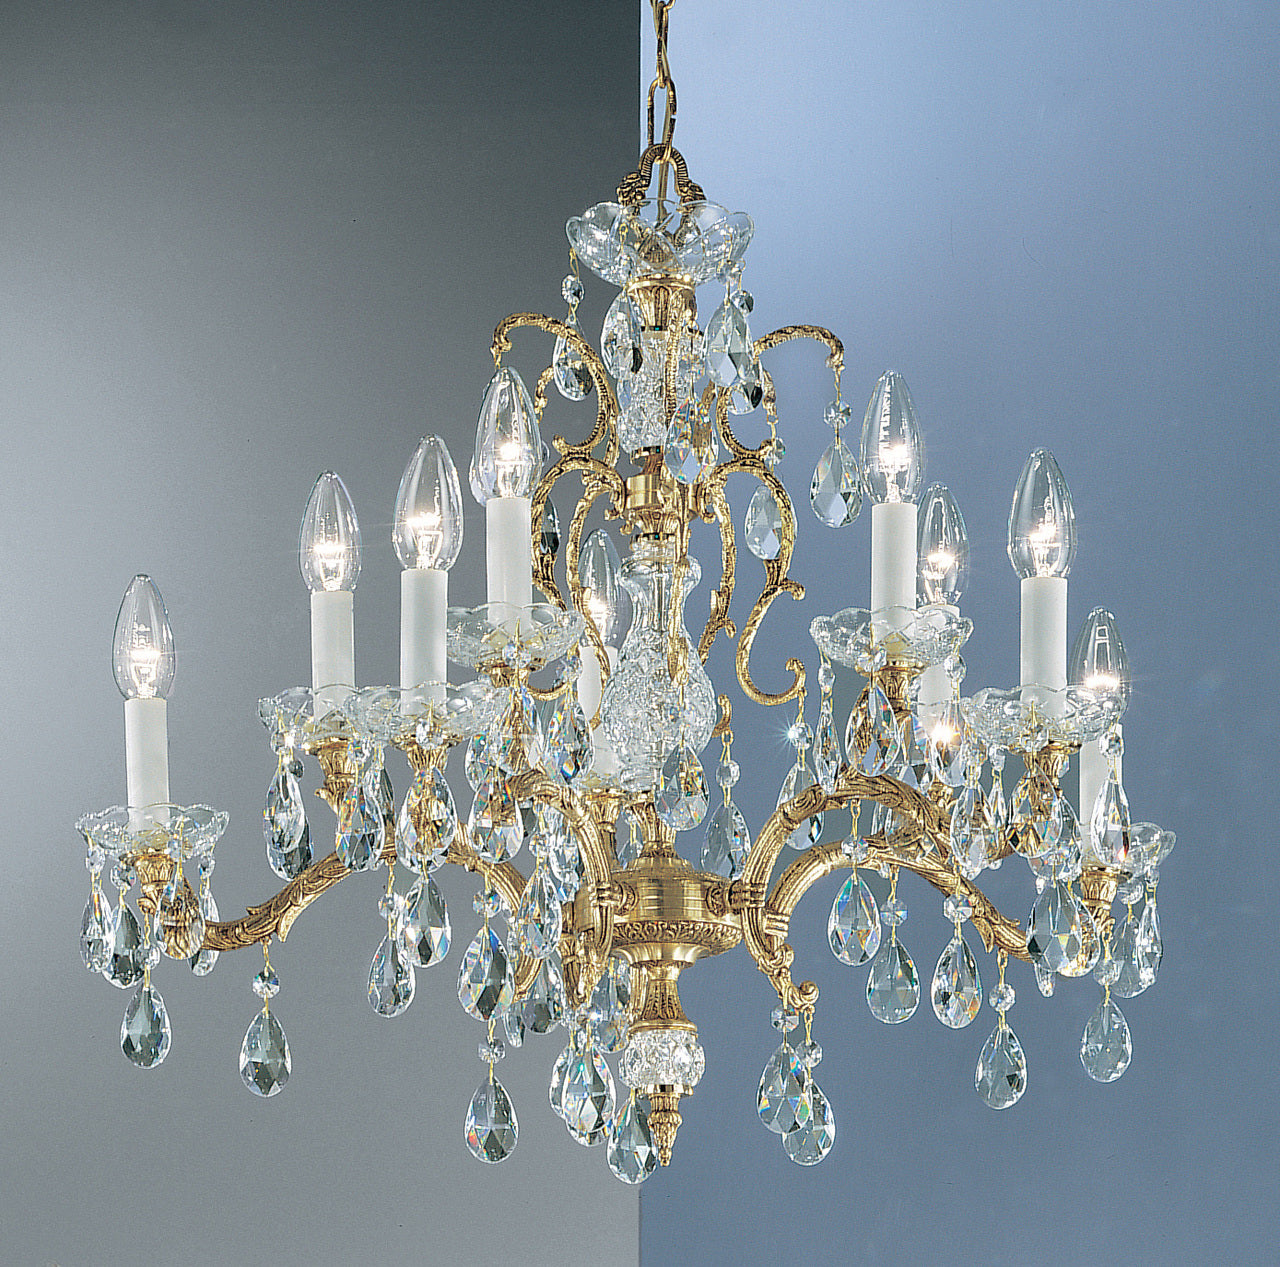 Classic Lighting 5530 OWB C Madrid Crystal/Cast Brass Chandelier in Olde World Bronze (Imported from Spain)